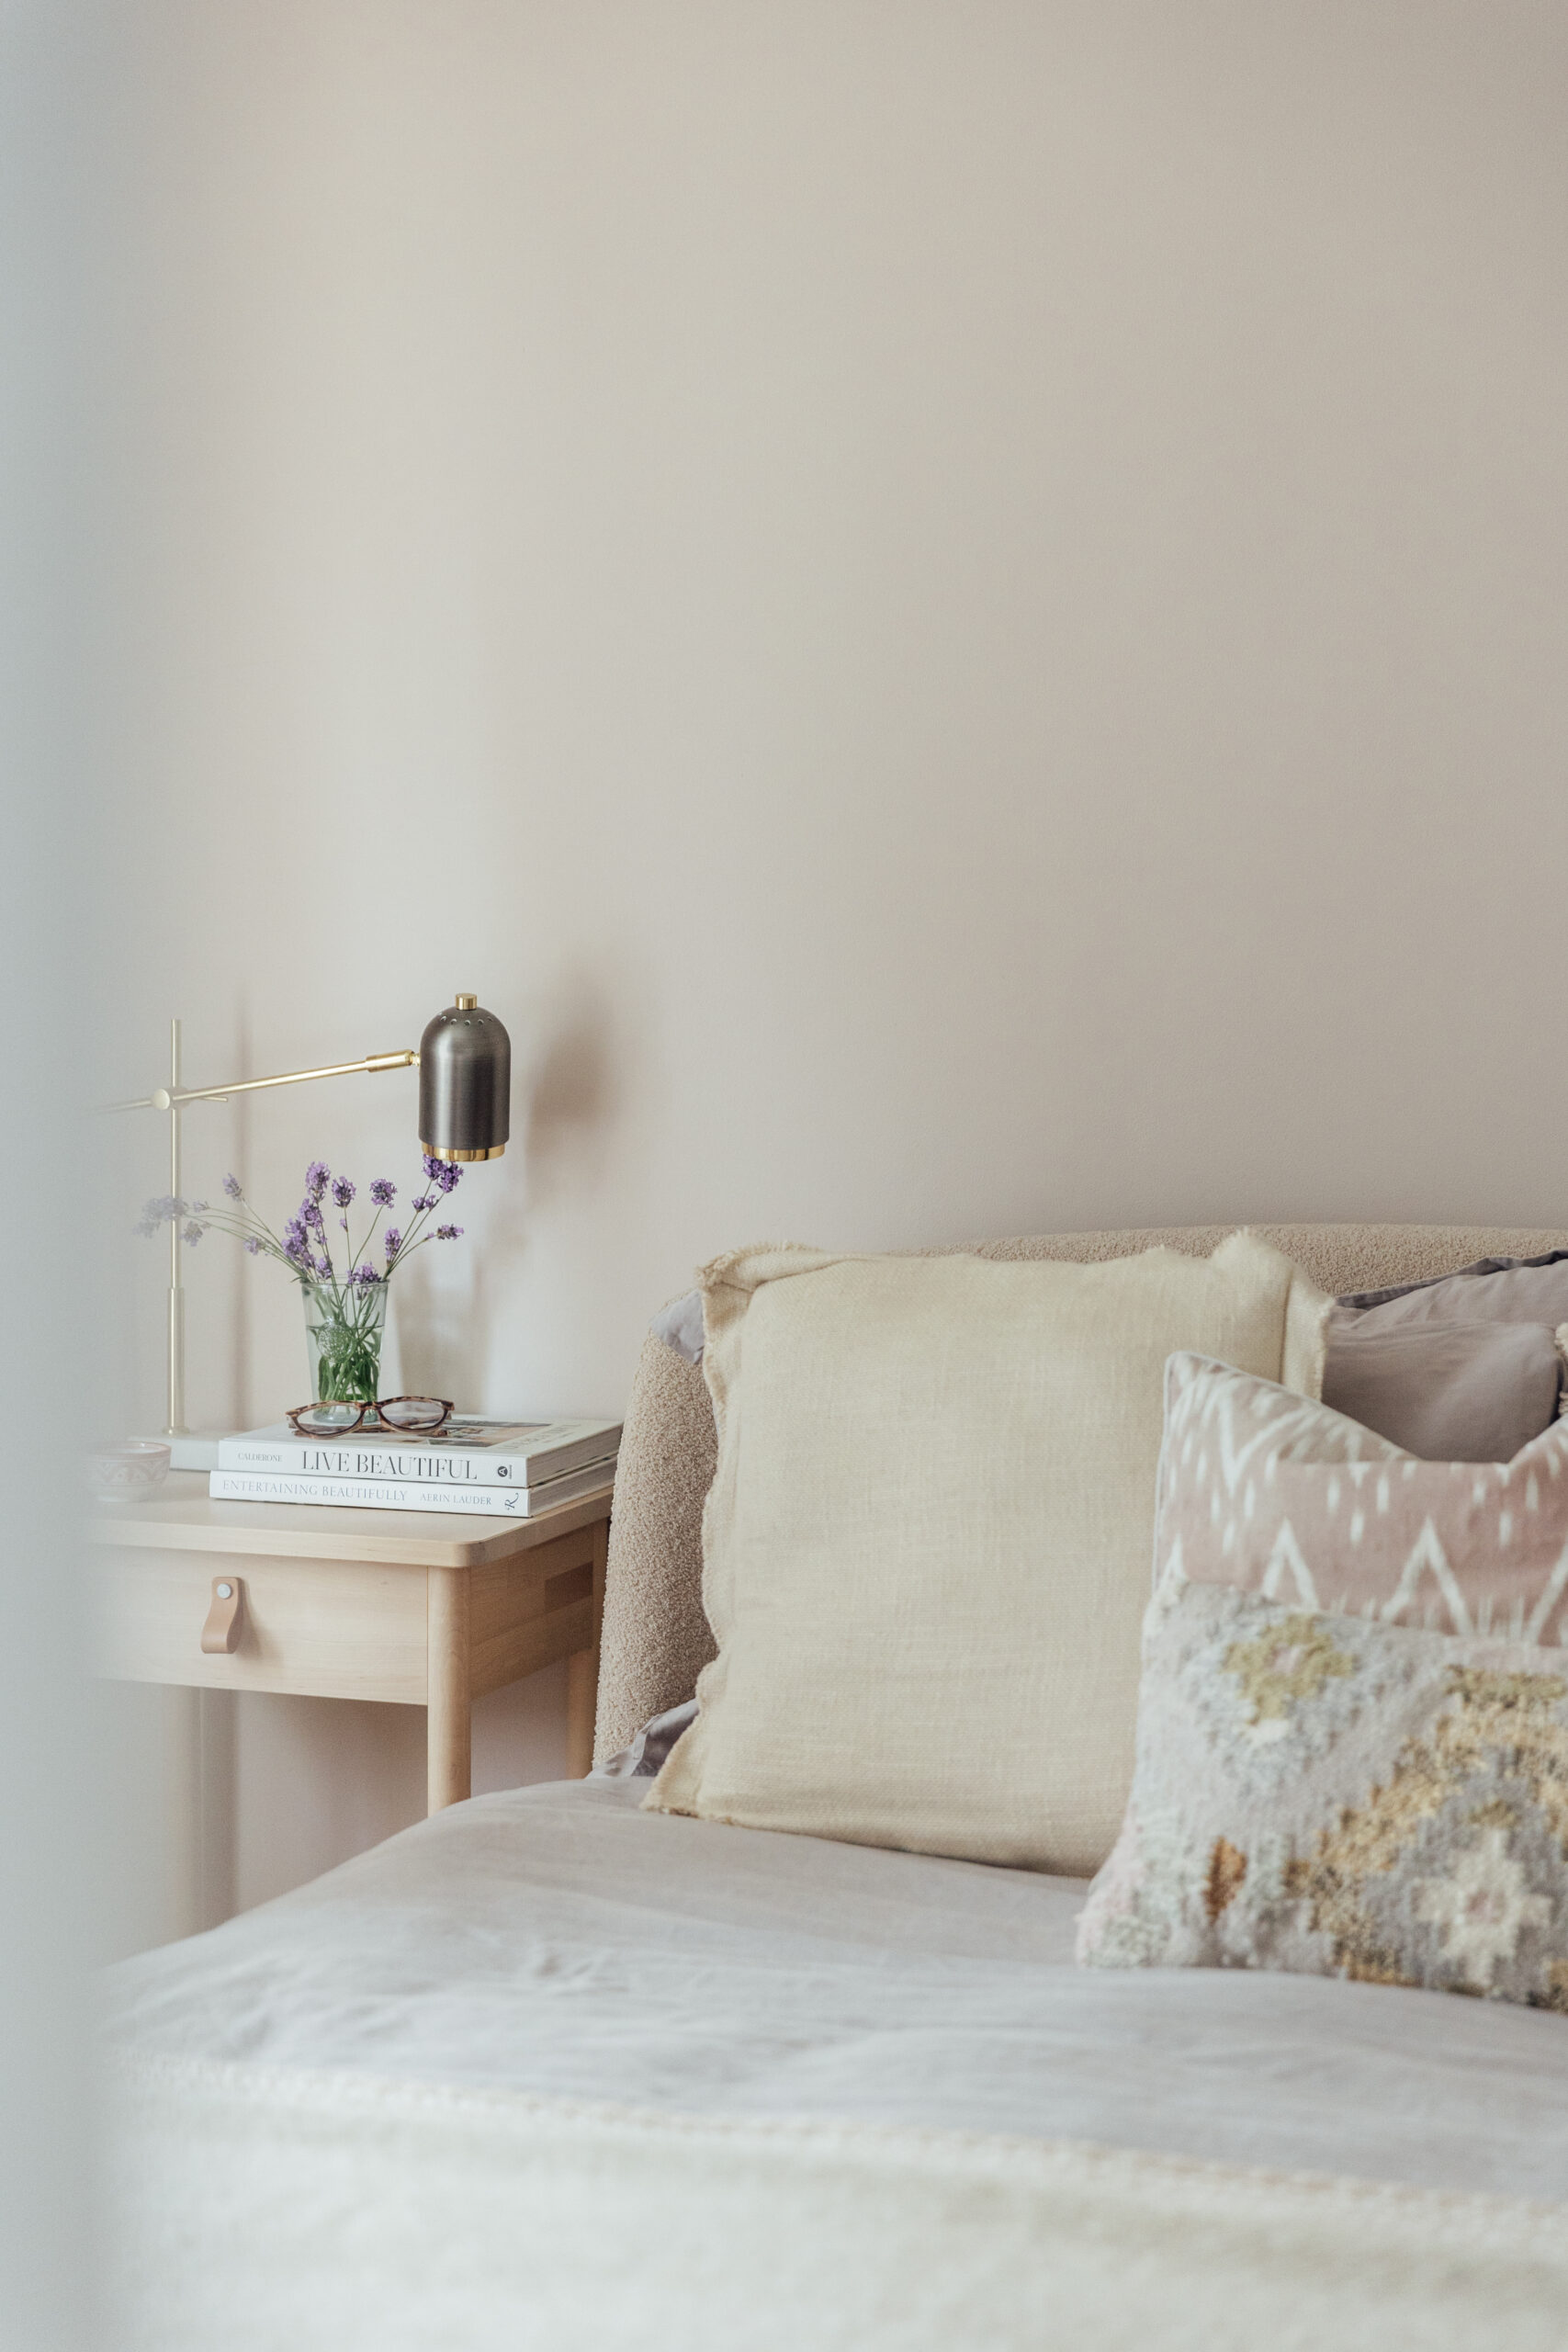 Dreamy Warm Neutral Bedroom Tour | Warm Soft Hues Used Throughout Our Bedroom Monica Beatrice Blog